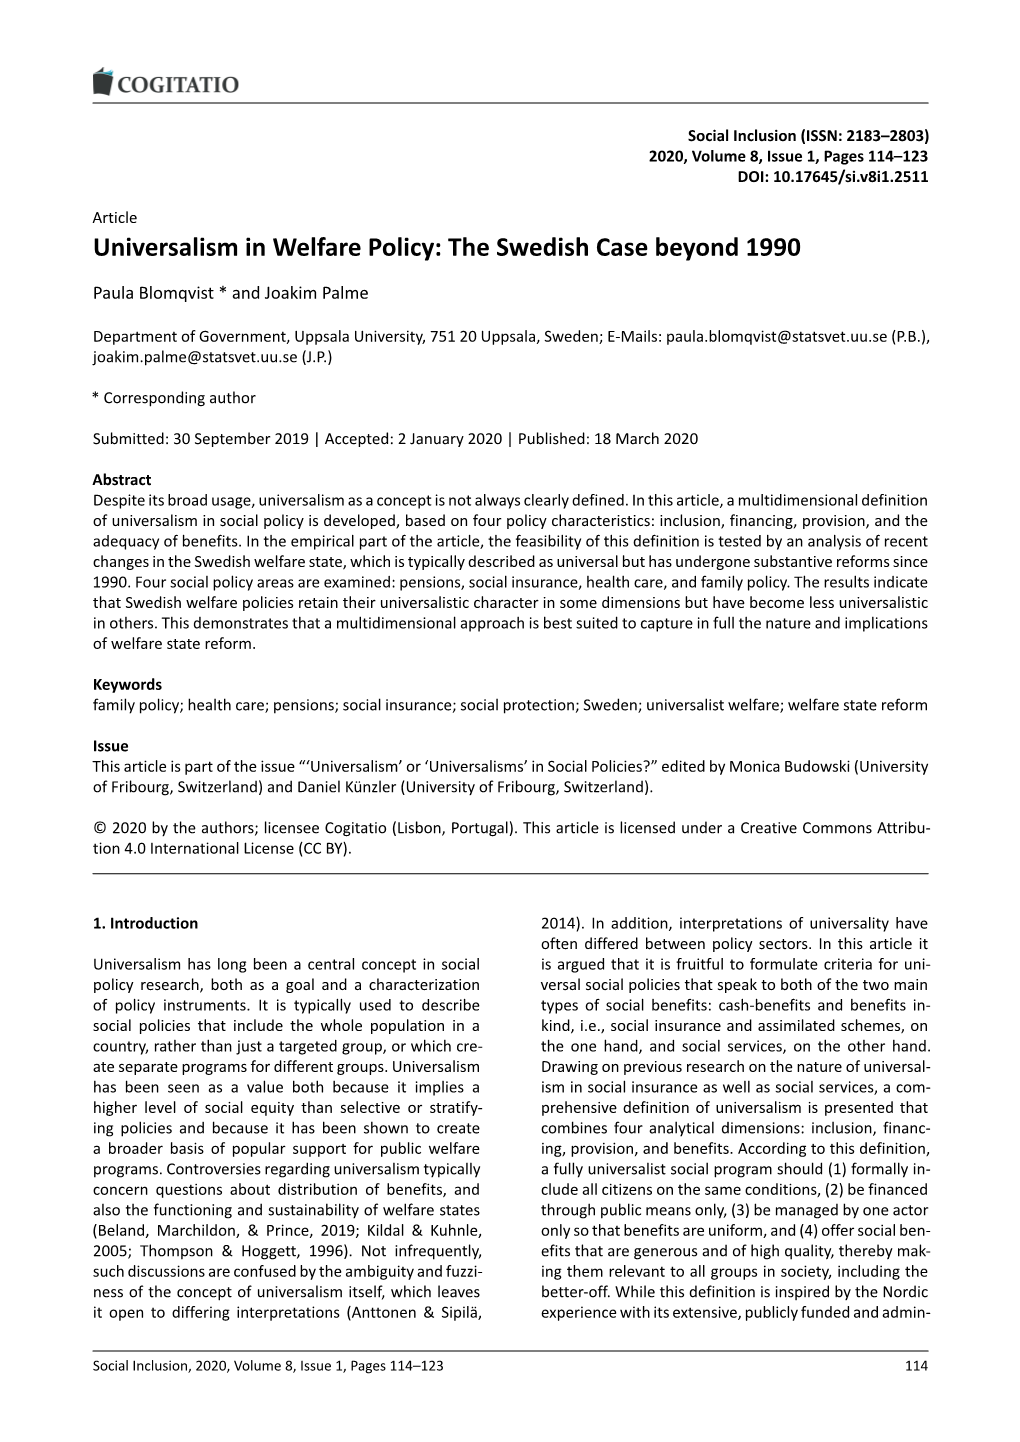 Universalism in Welfare Policy: the Swedish Case Beyond 1990